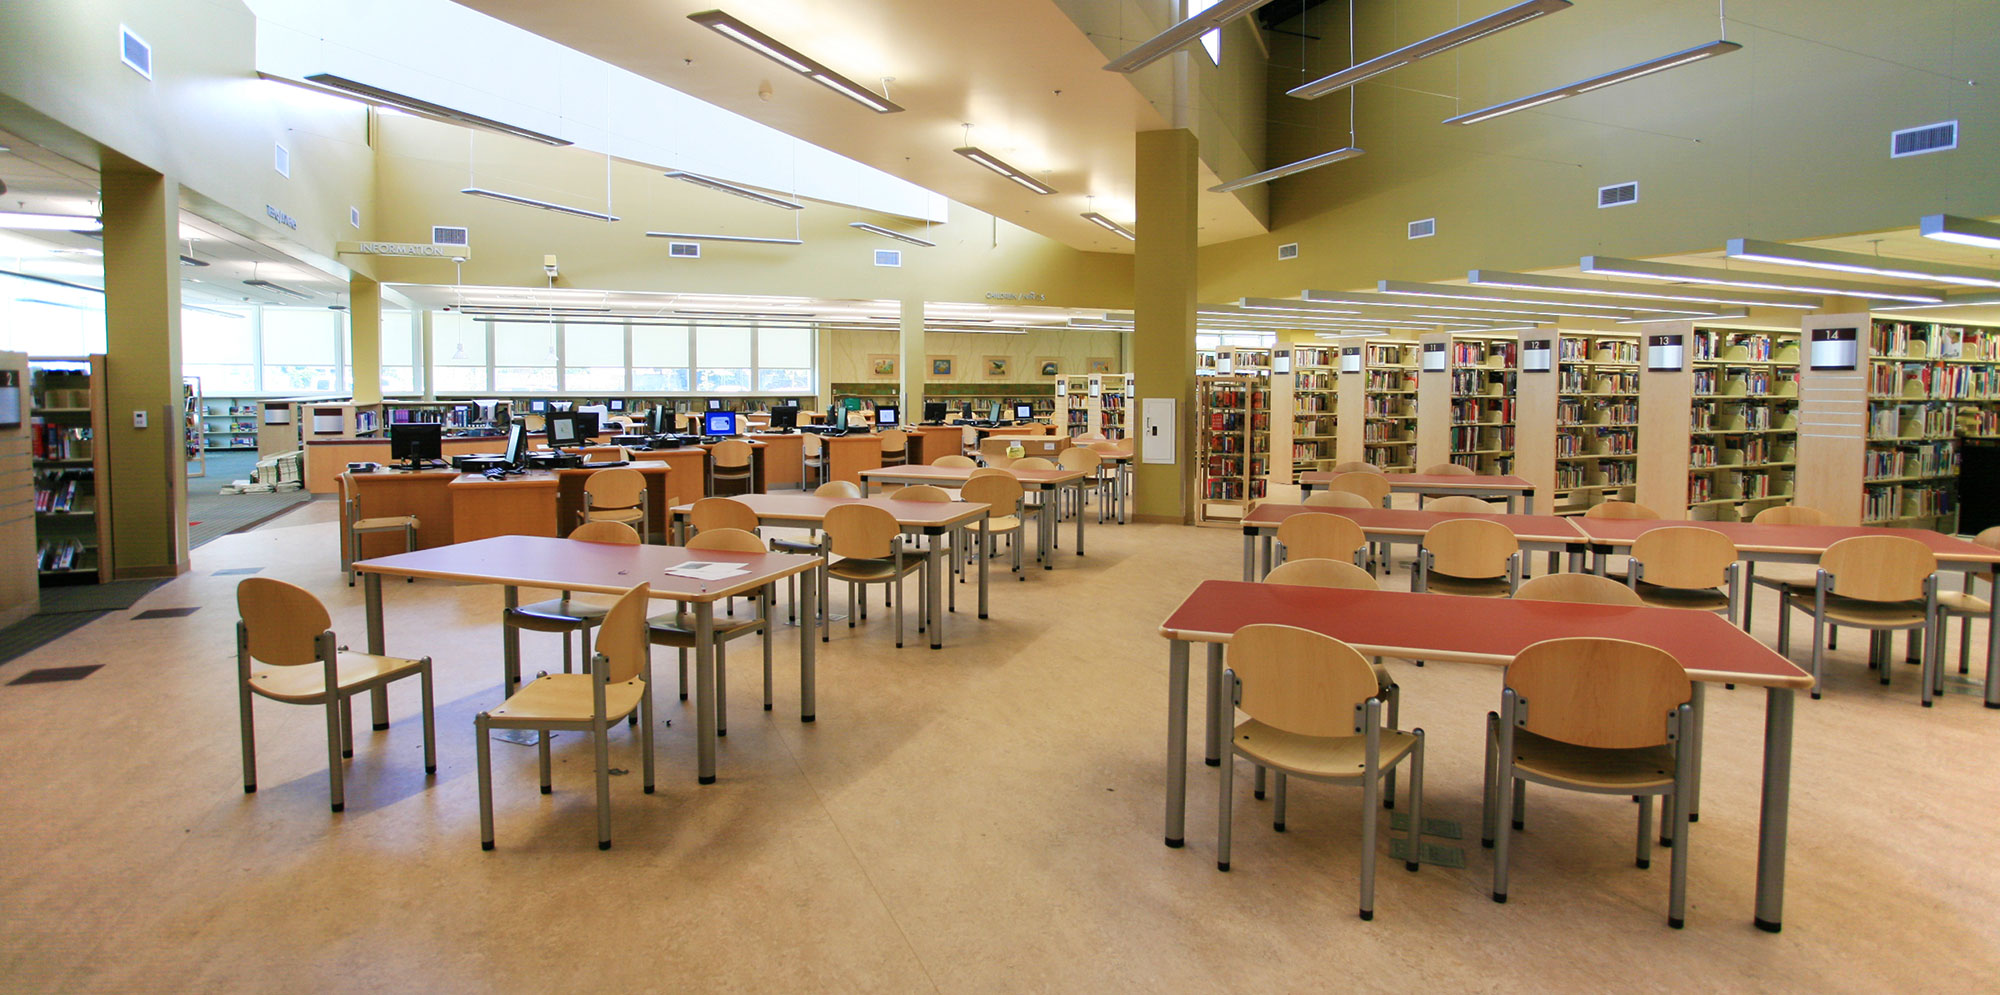 Exposition Library group study space